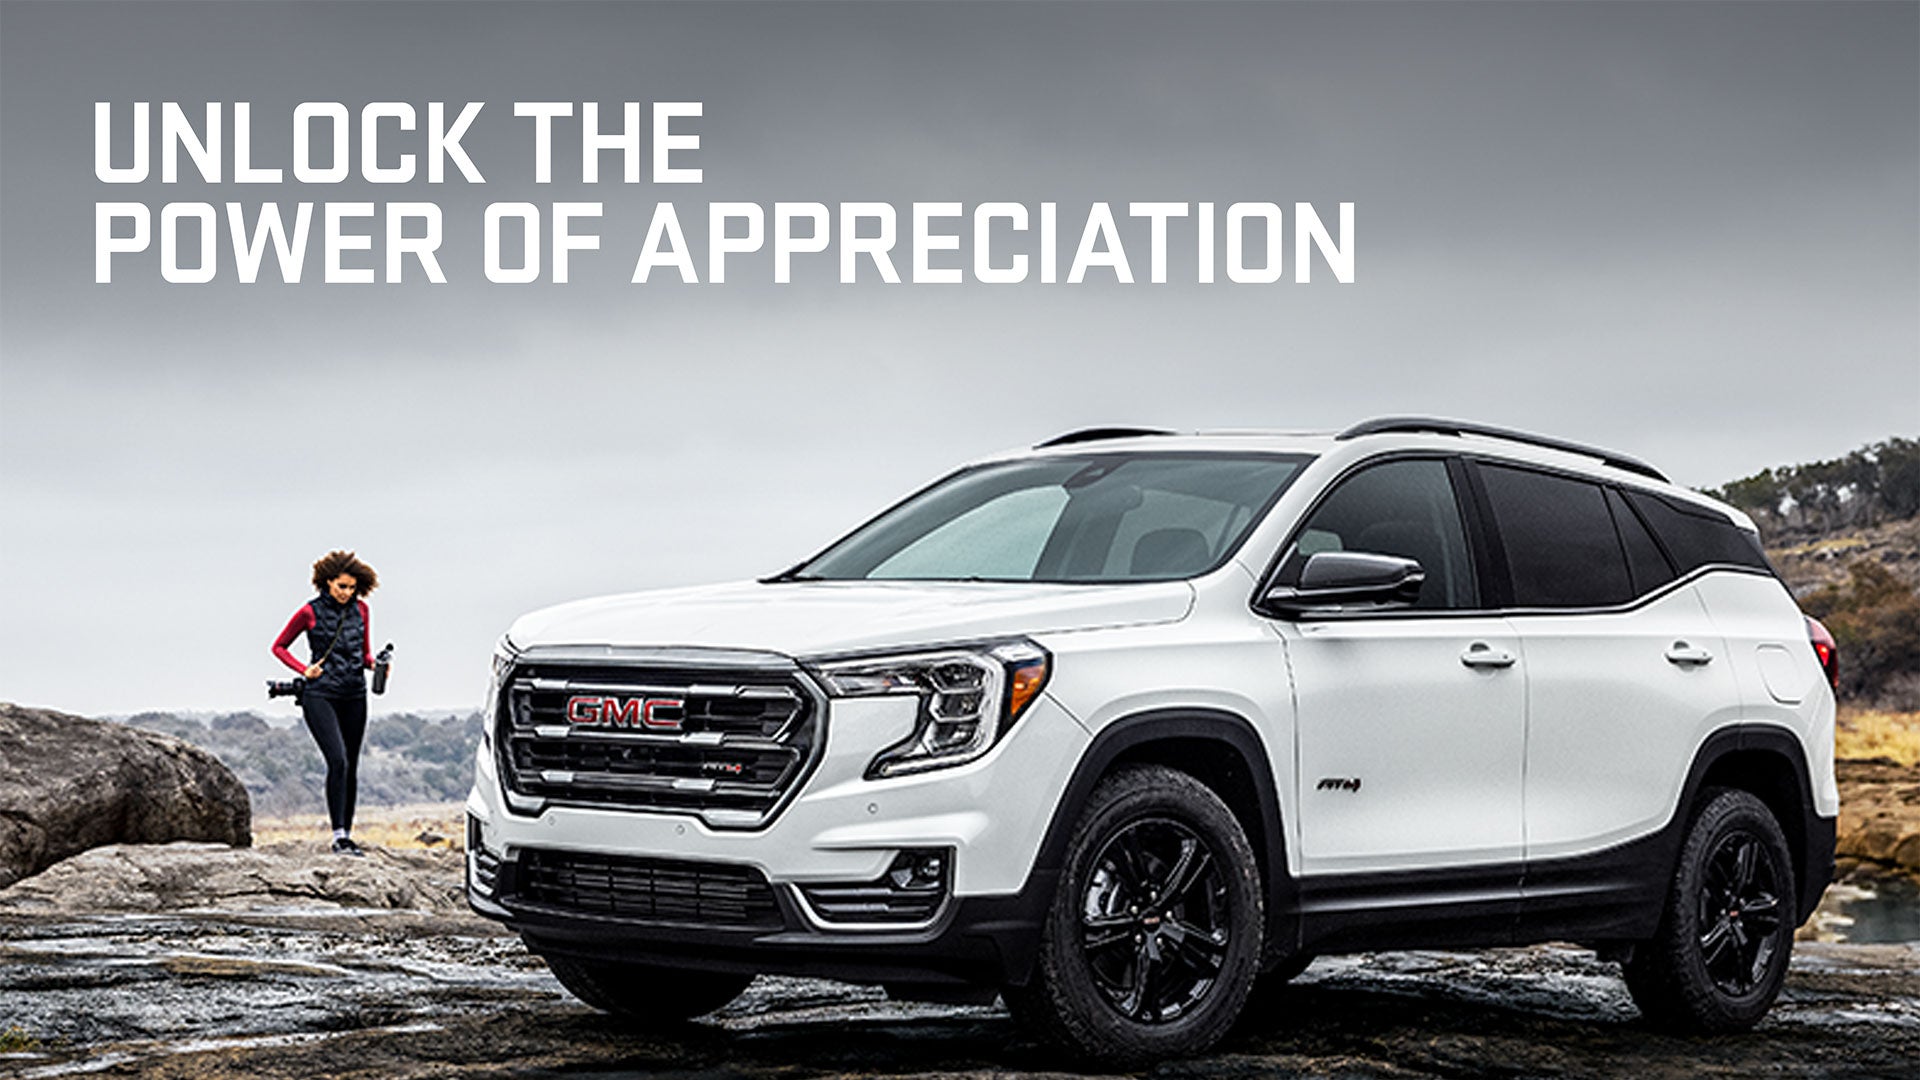 Unlock the power of appreciation | Zimbrick Buick/GMC West in Madison WI